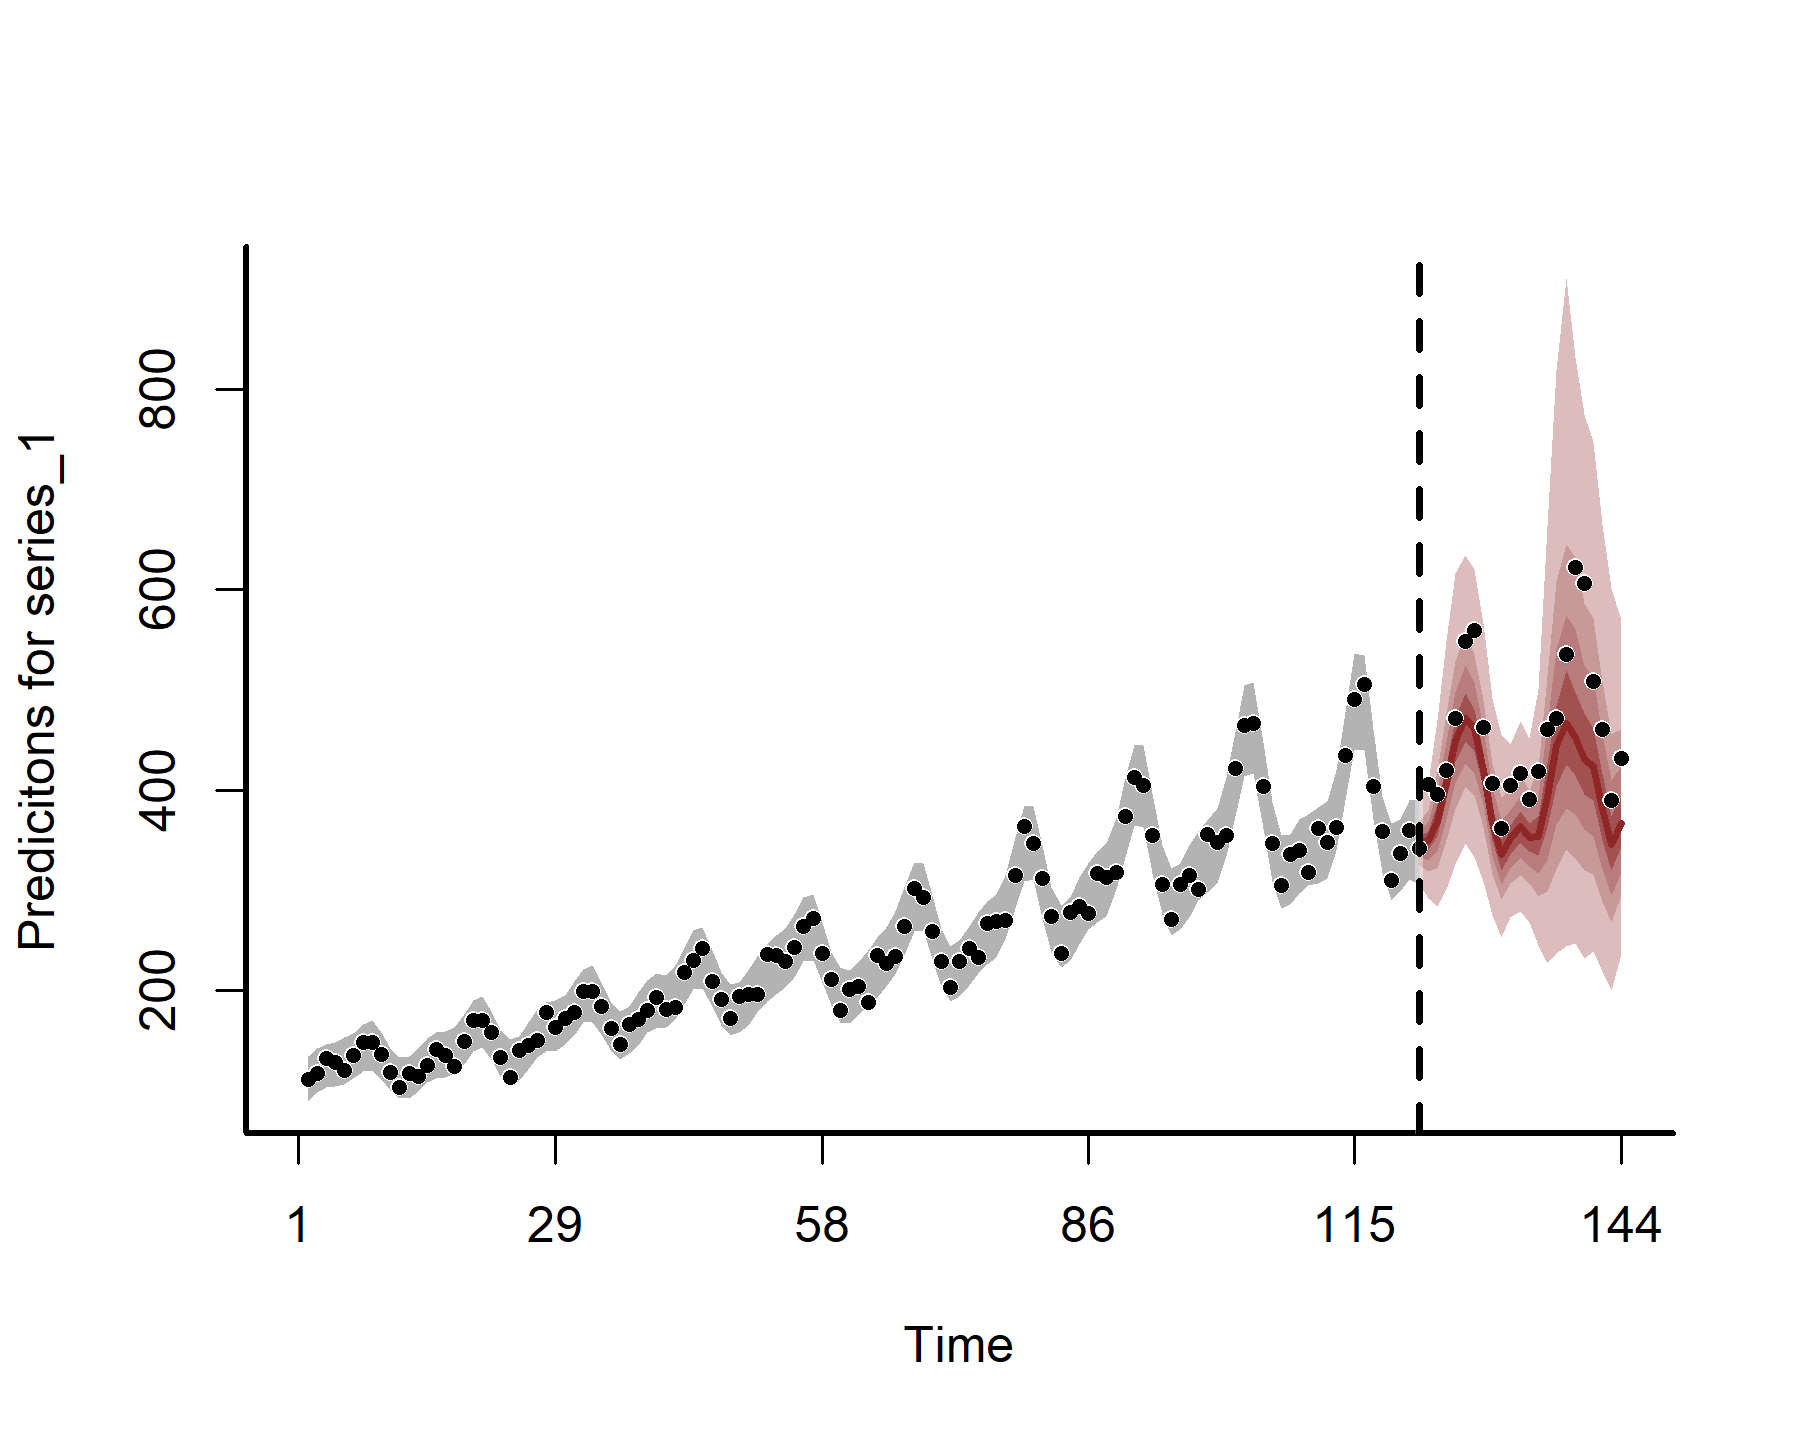 Forecasts from a Dynamic Generalized Additive Model with time-varying seasonality using a tensor product, fitted in mvgam